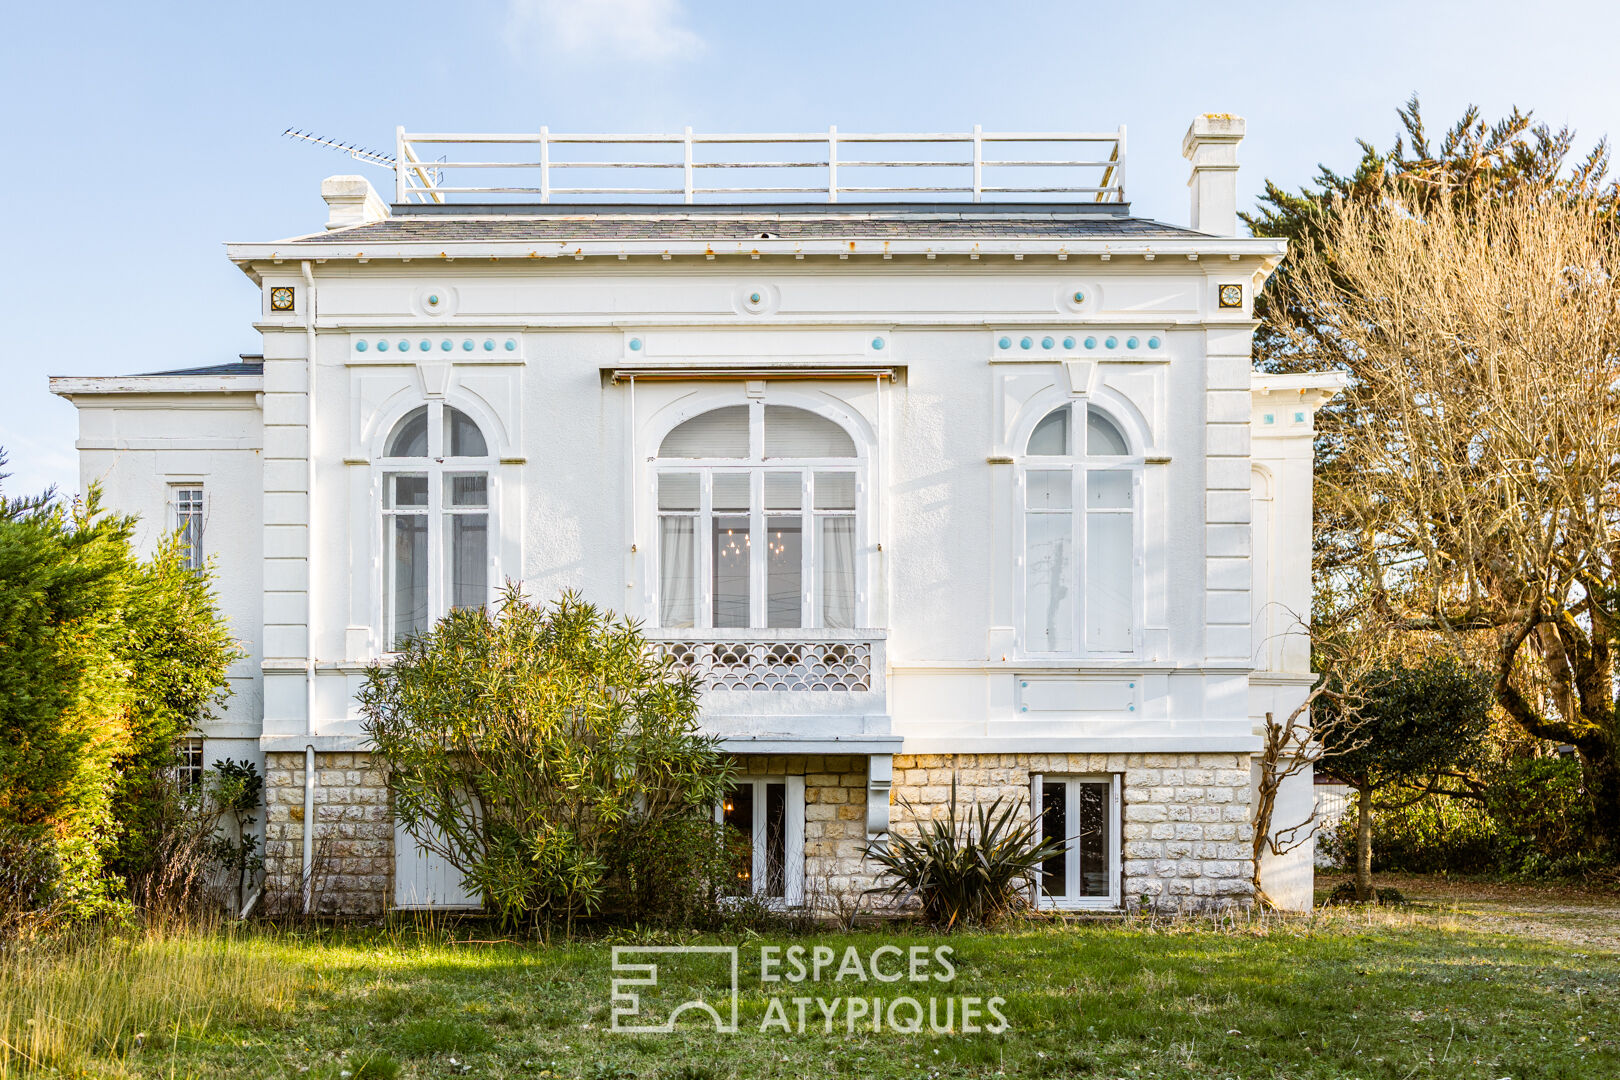 Late 19th century villa and its park close to the sea